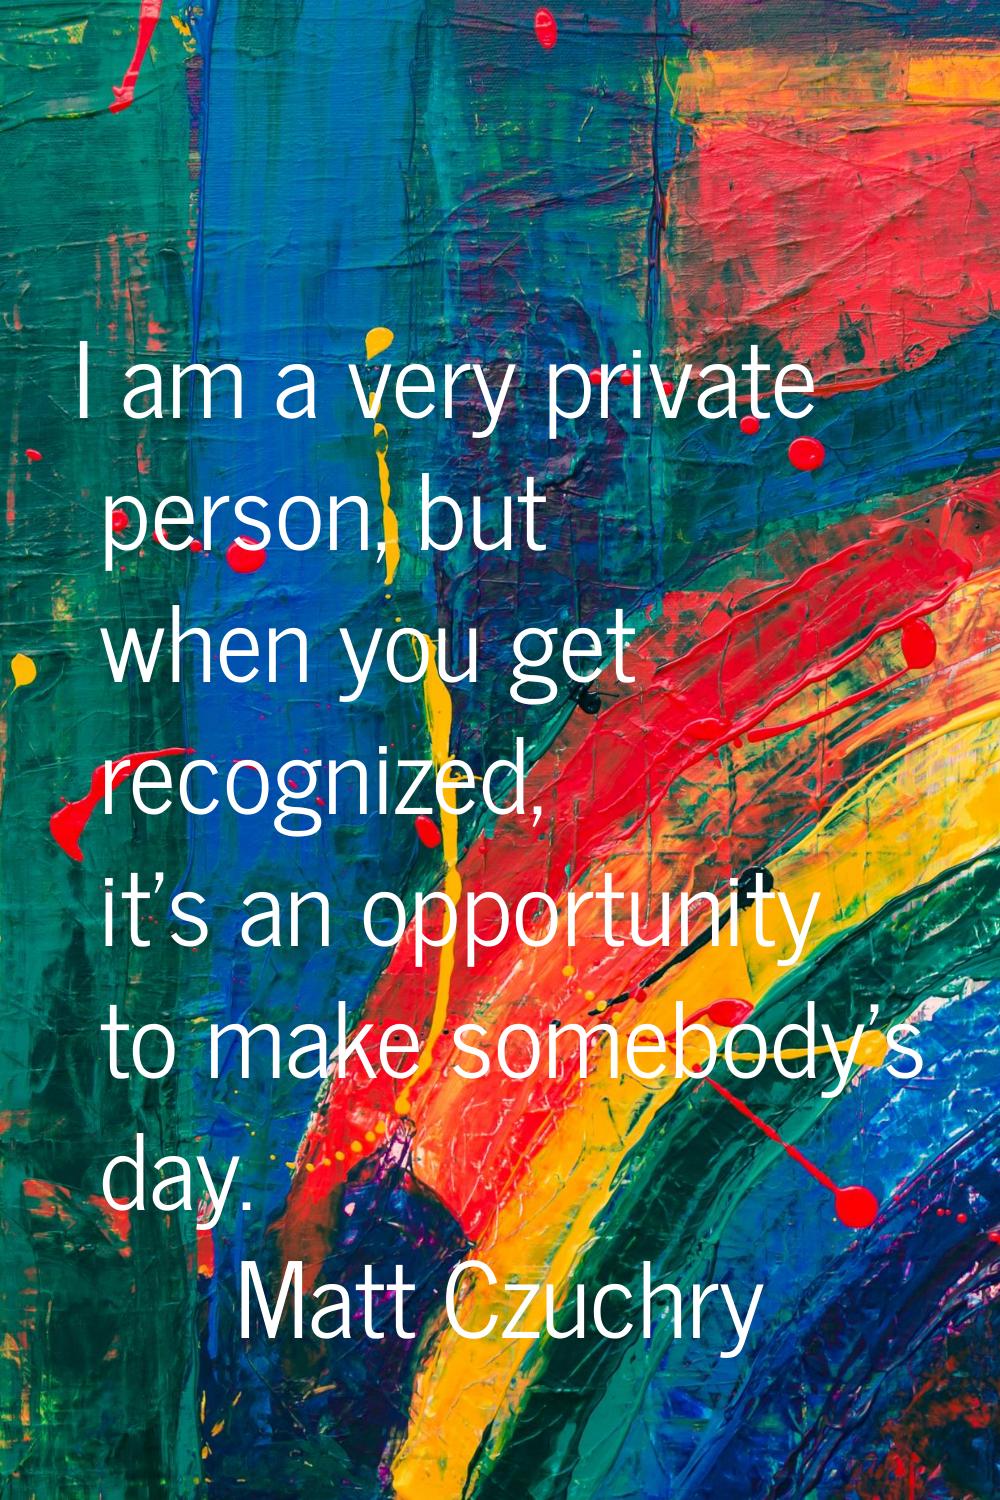 I am a very private person, but when you get recognized, it's an opportunity to make somebody's day